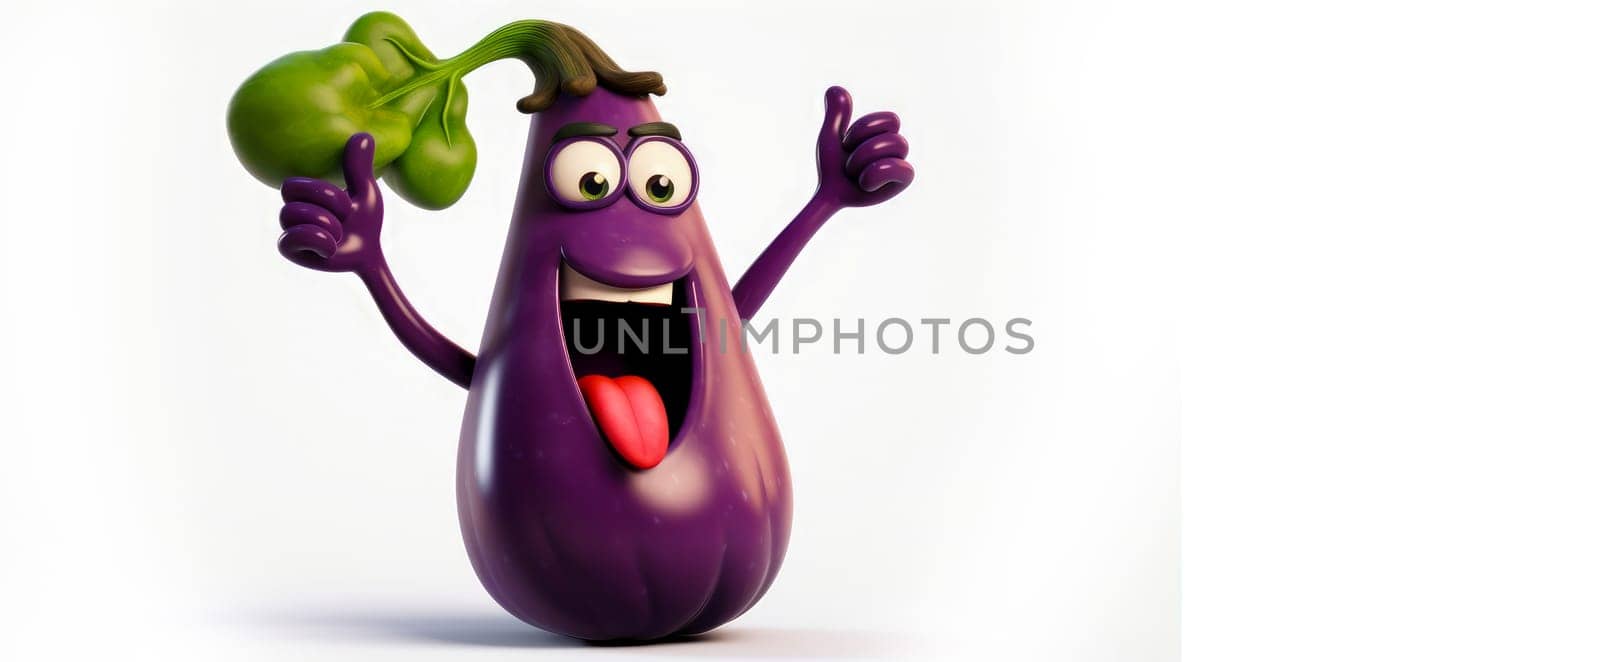 Eggplant with a cheerful face 3D on a white background. by Alla_Yurtayeva